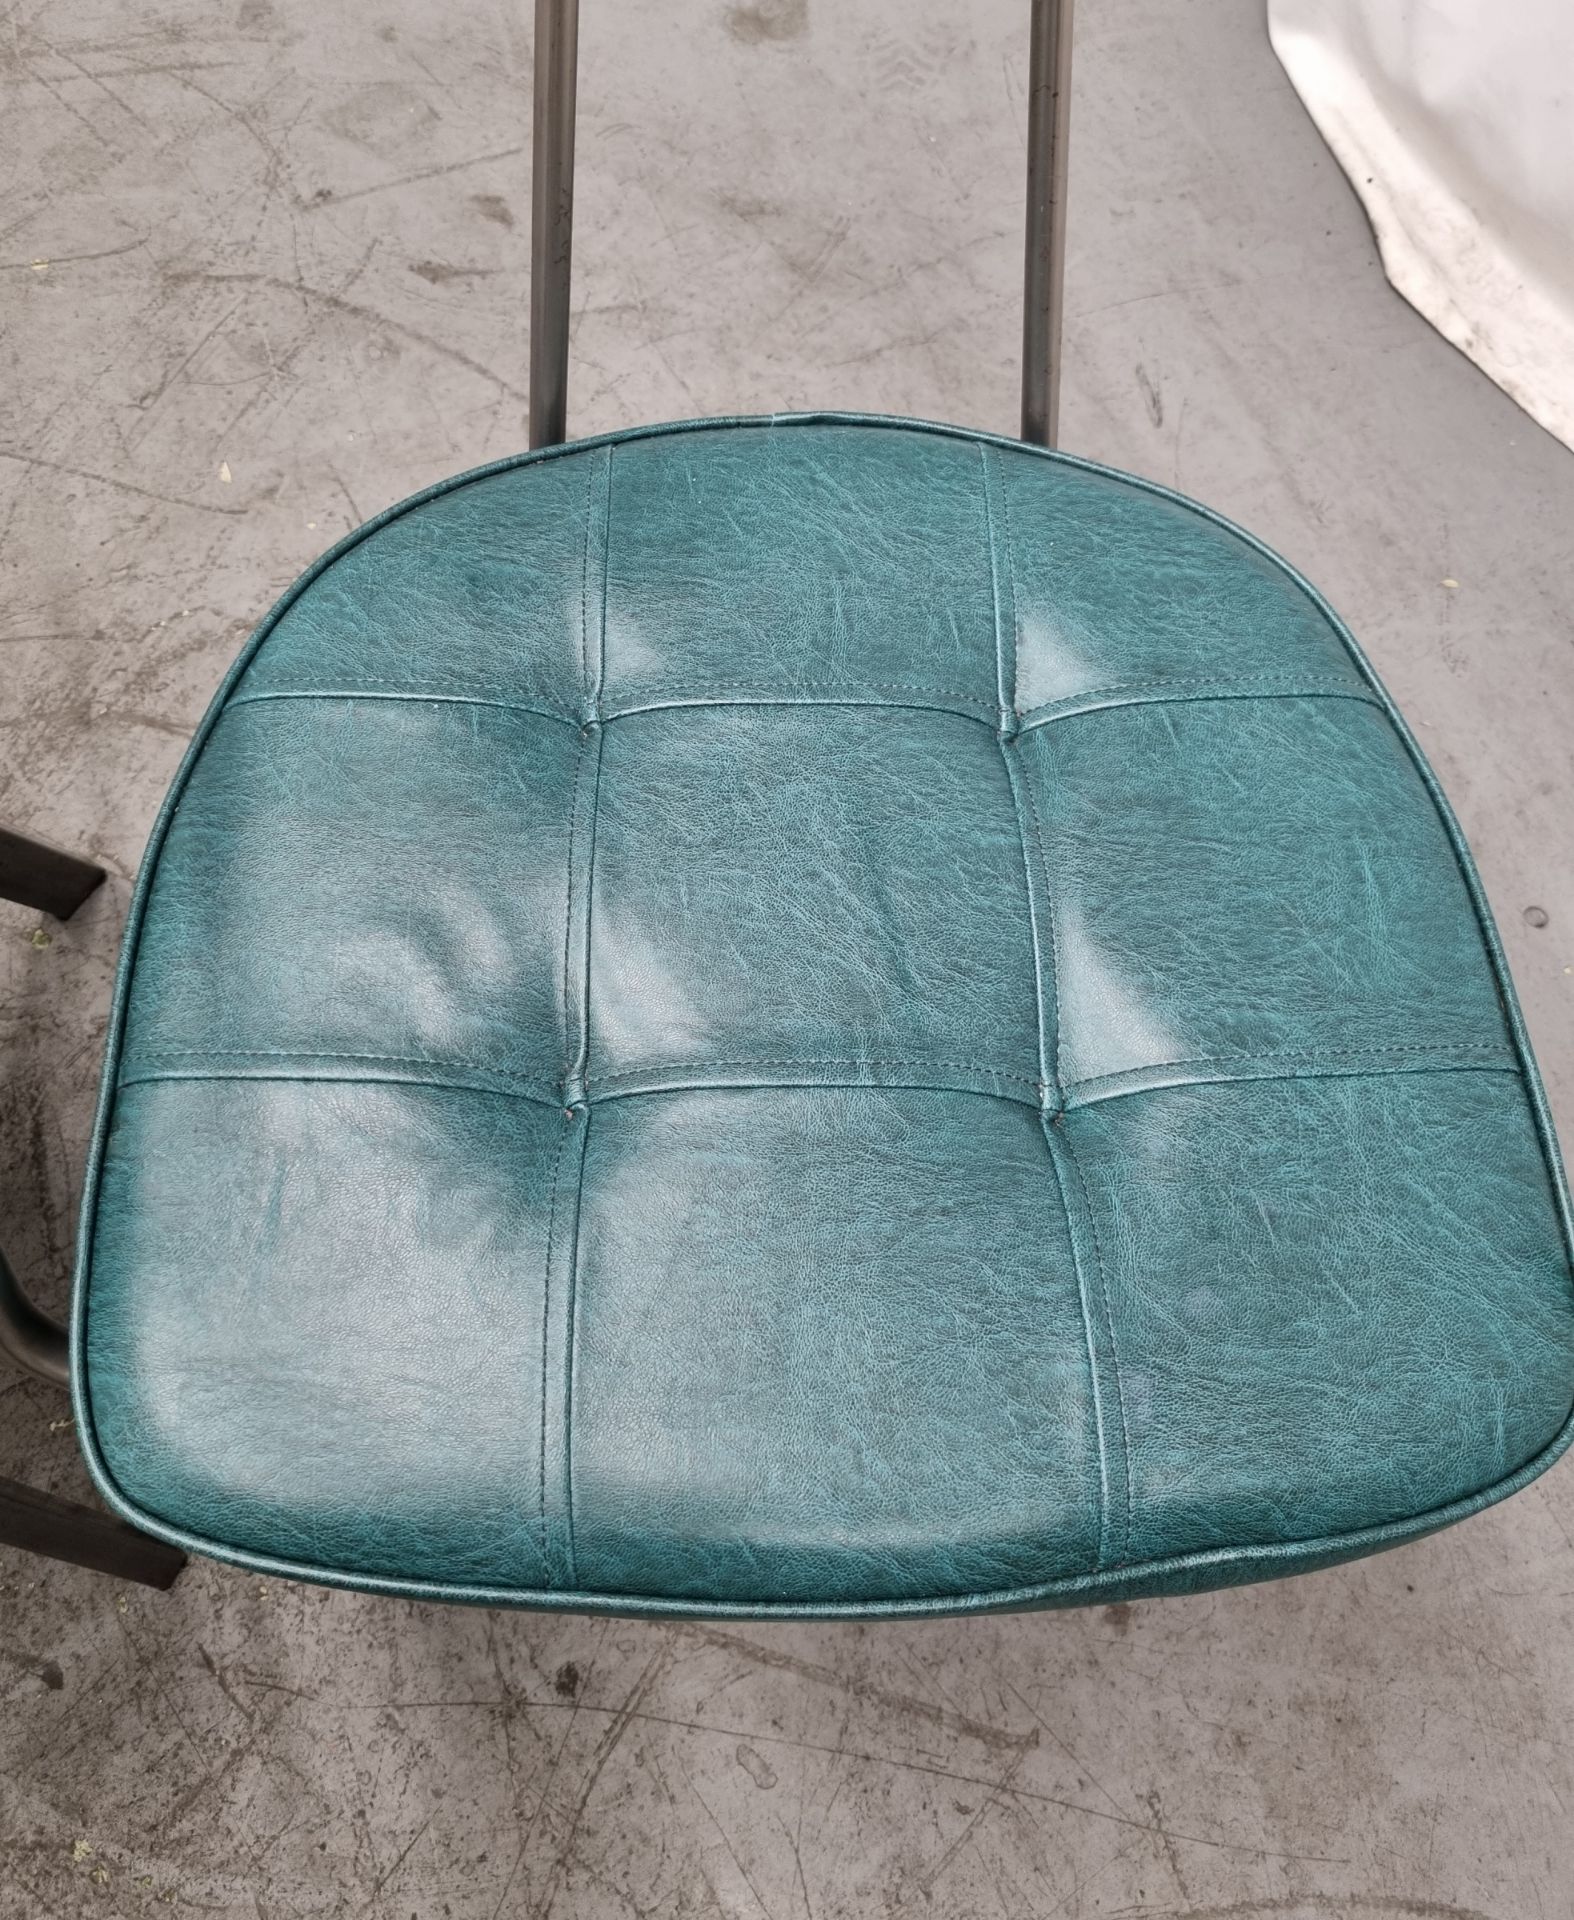 4x Industrial green leather restaurant chairs - L 550 x W 600 x H 80cm - Image 7 of 13